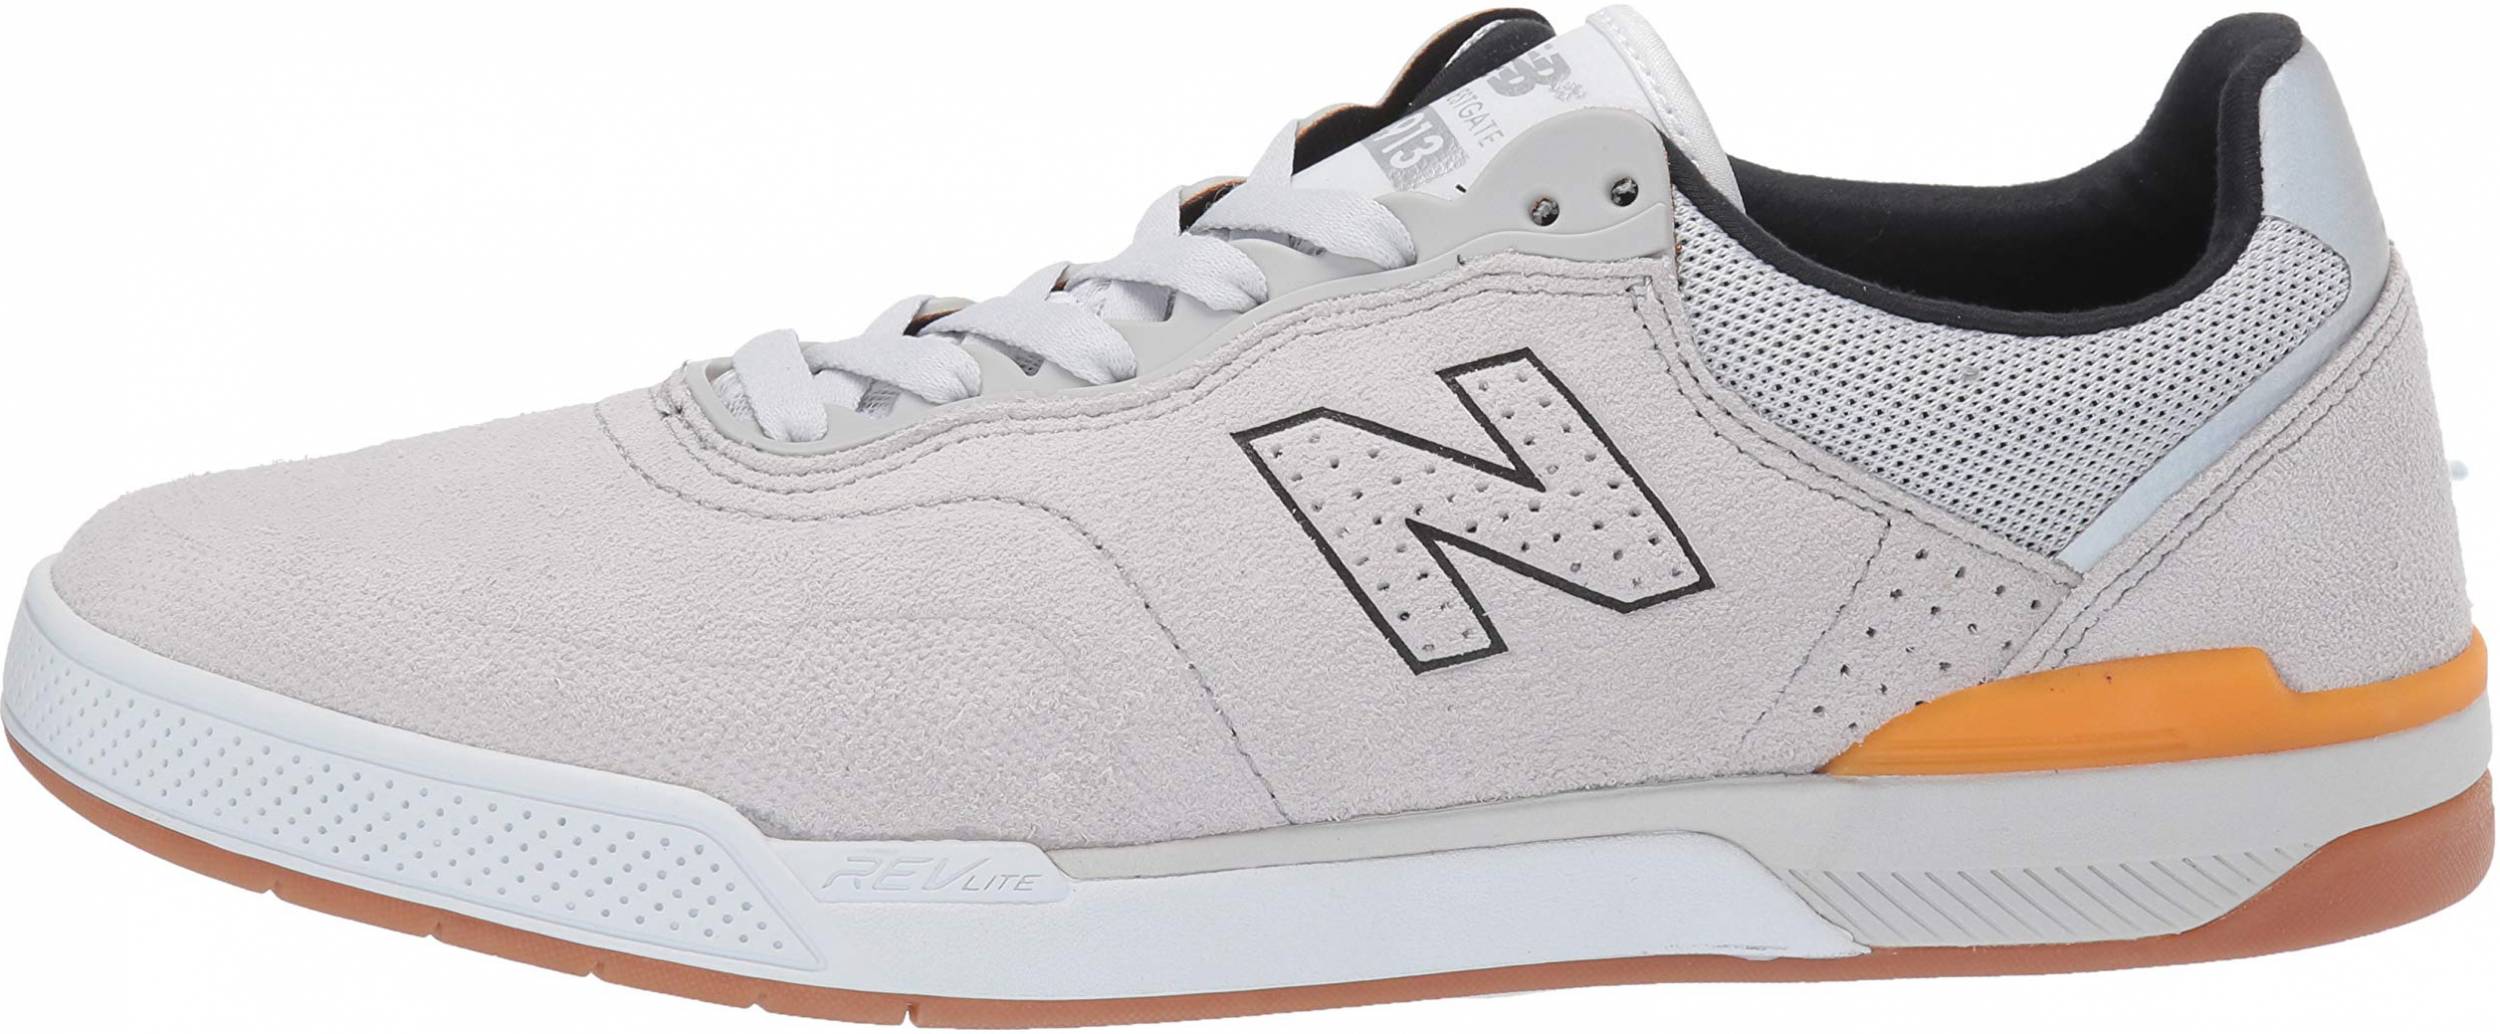 New Balance 913 sneakers in 4 colors (only £52) | RunRepeat